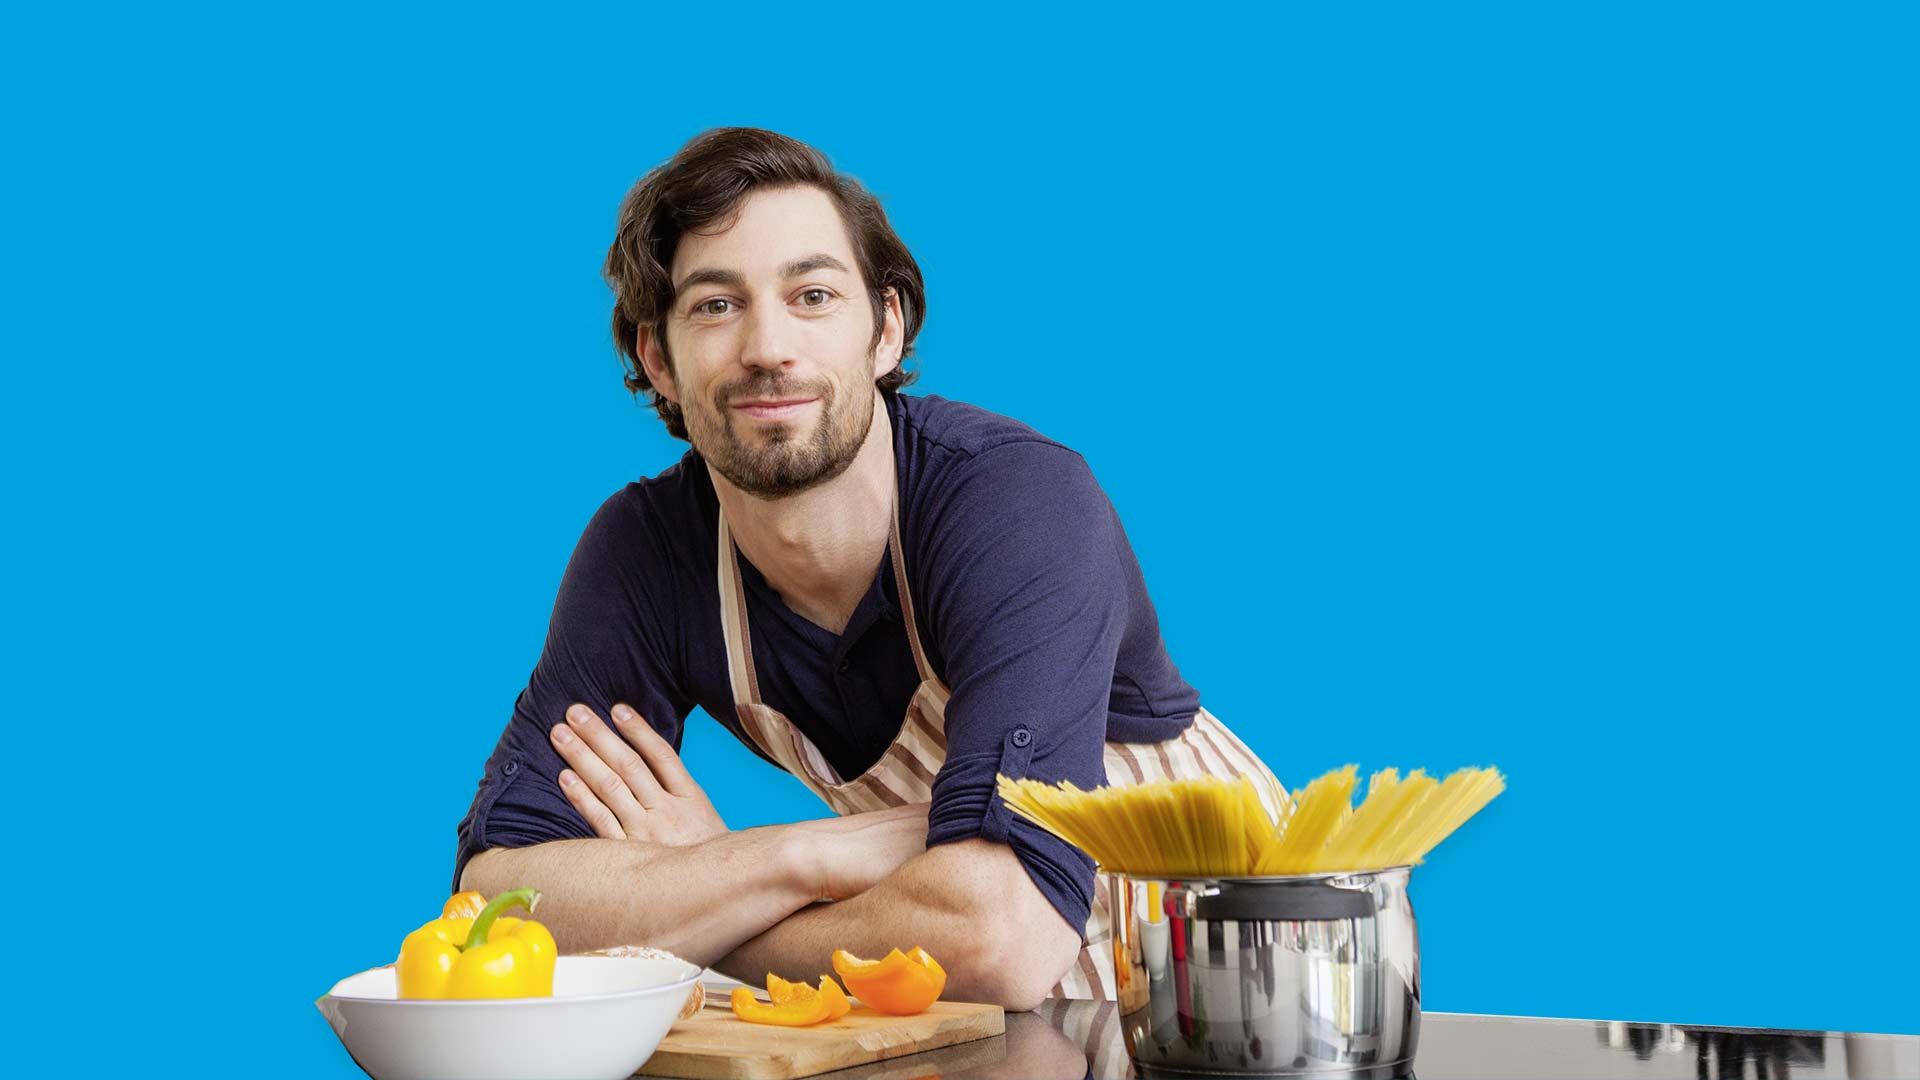 Young man with a beard leaning on a kitchen counter, about to start cooking pasta.